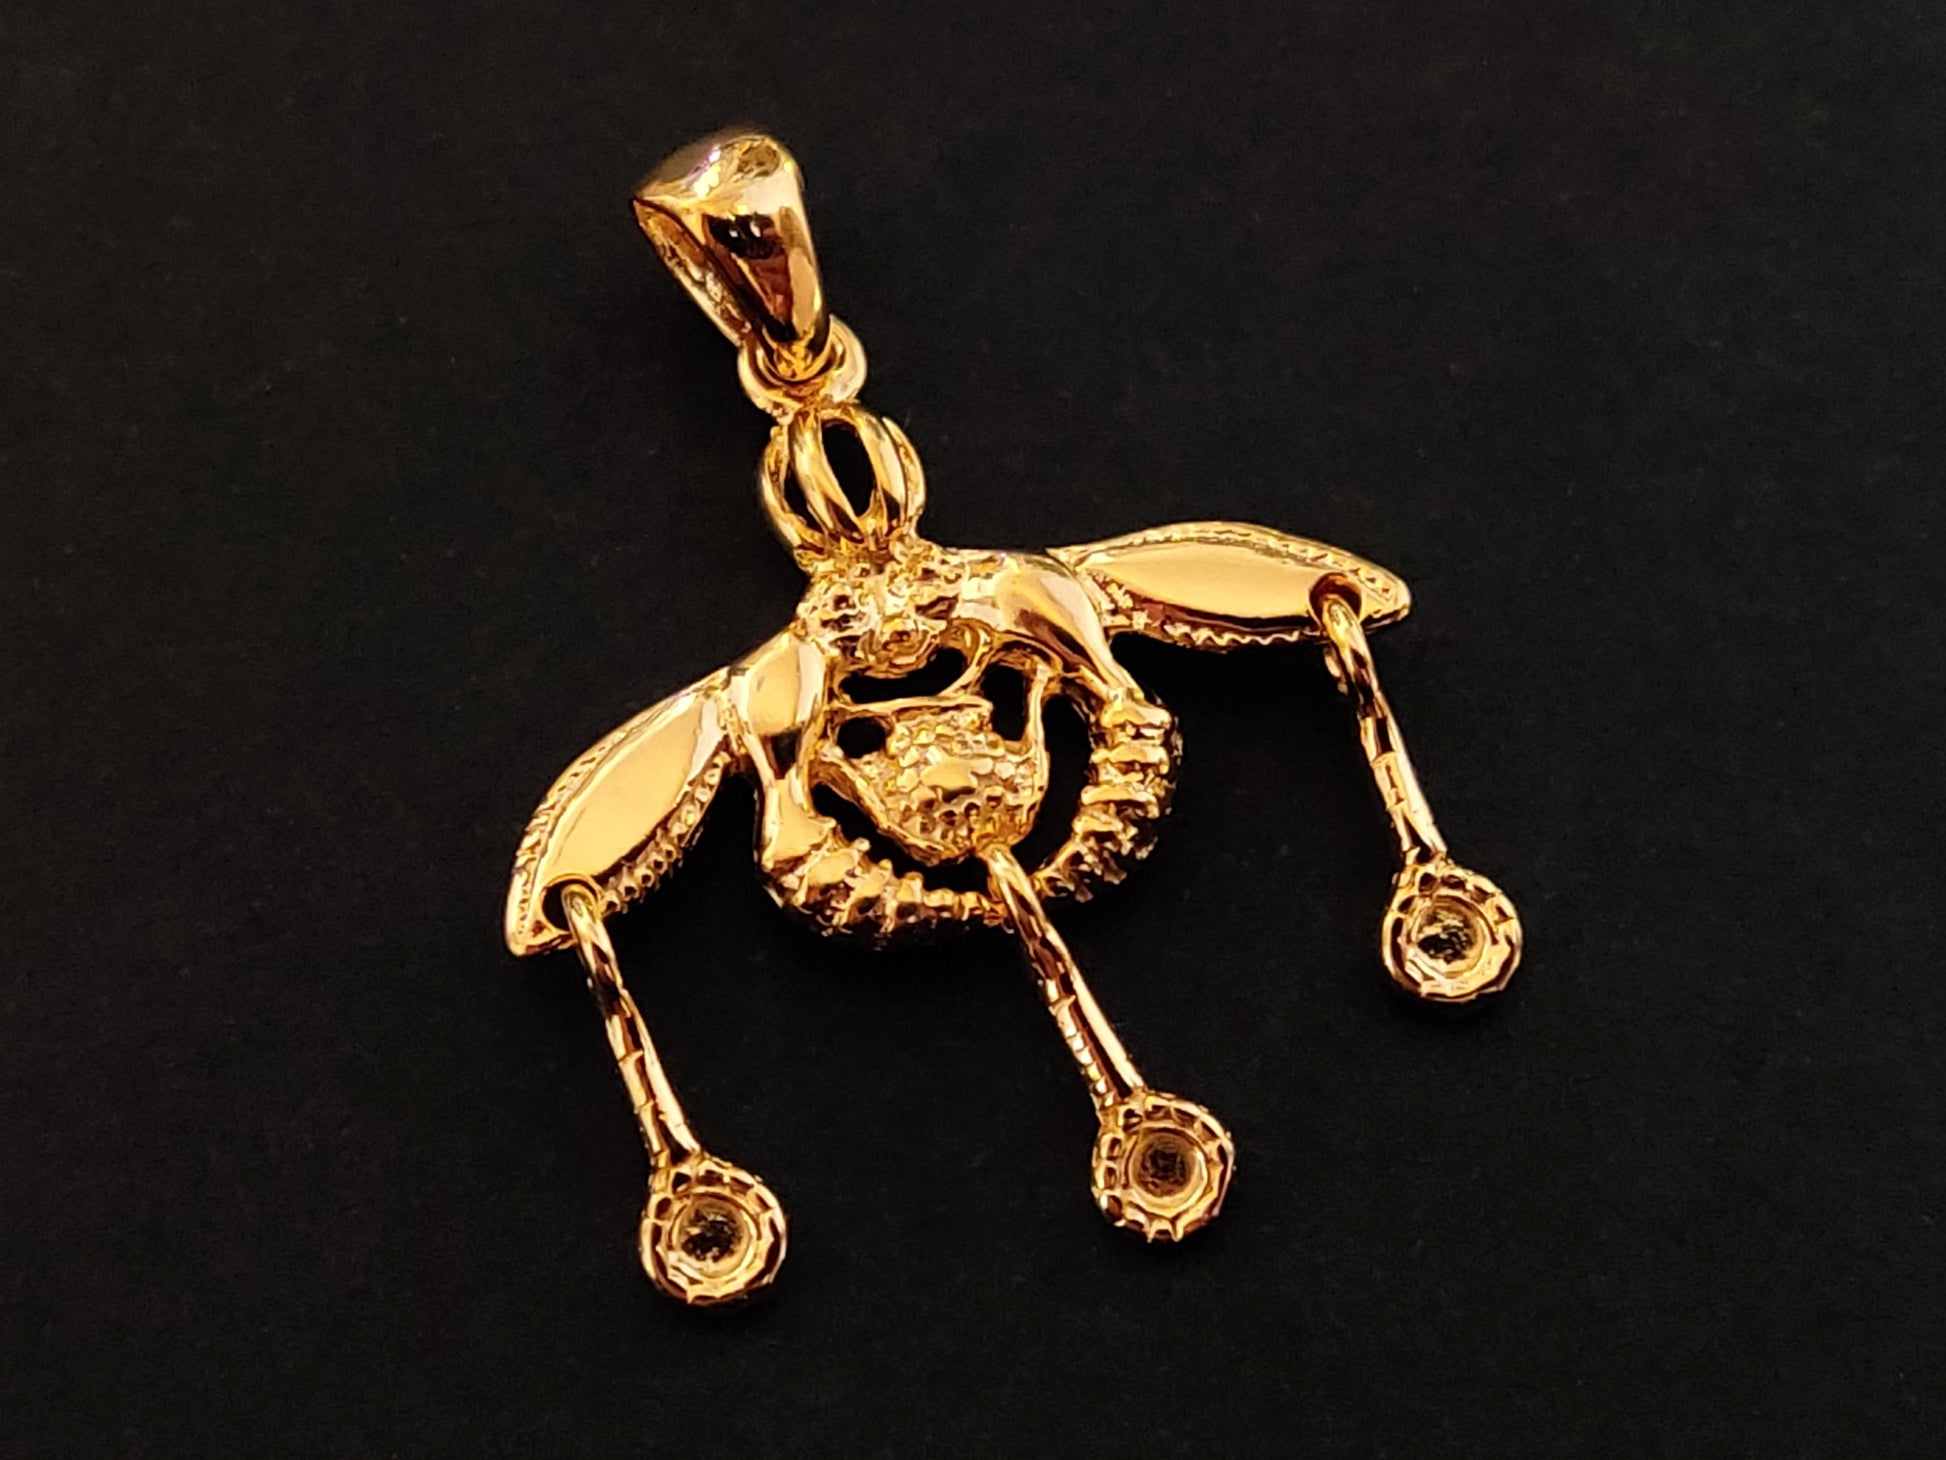 Greek silver pendant with the minoan bees design with gold plated finish measuring 25 mm